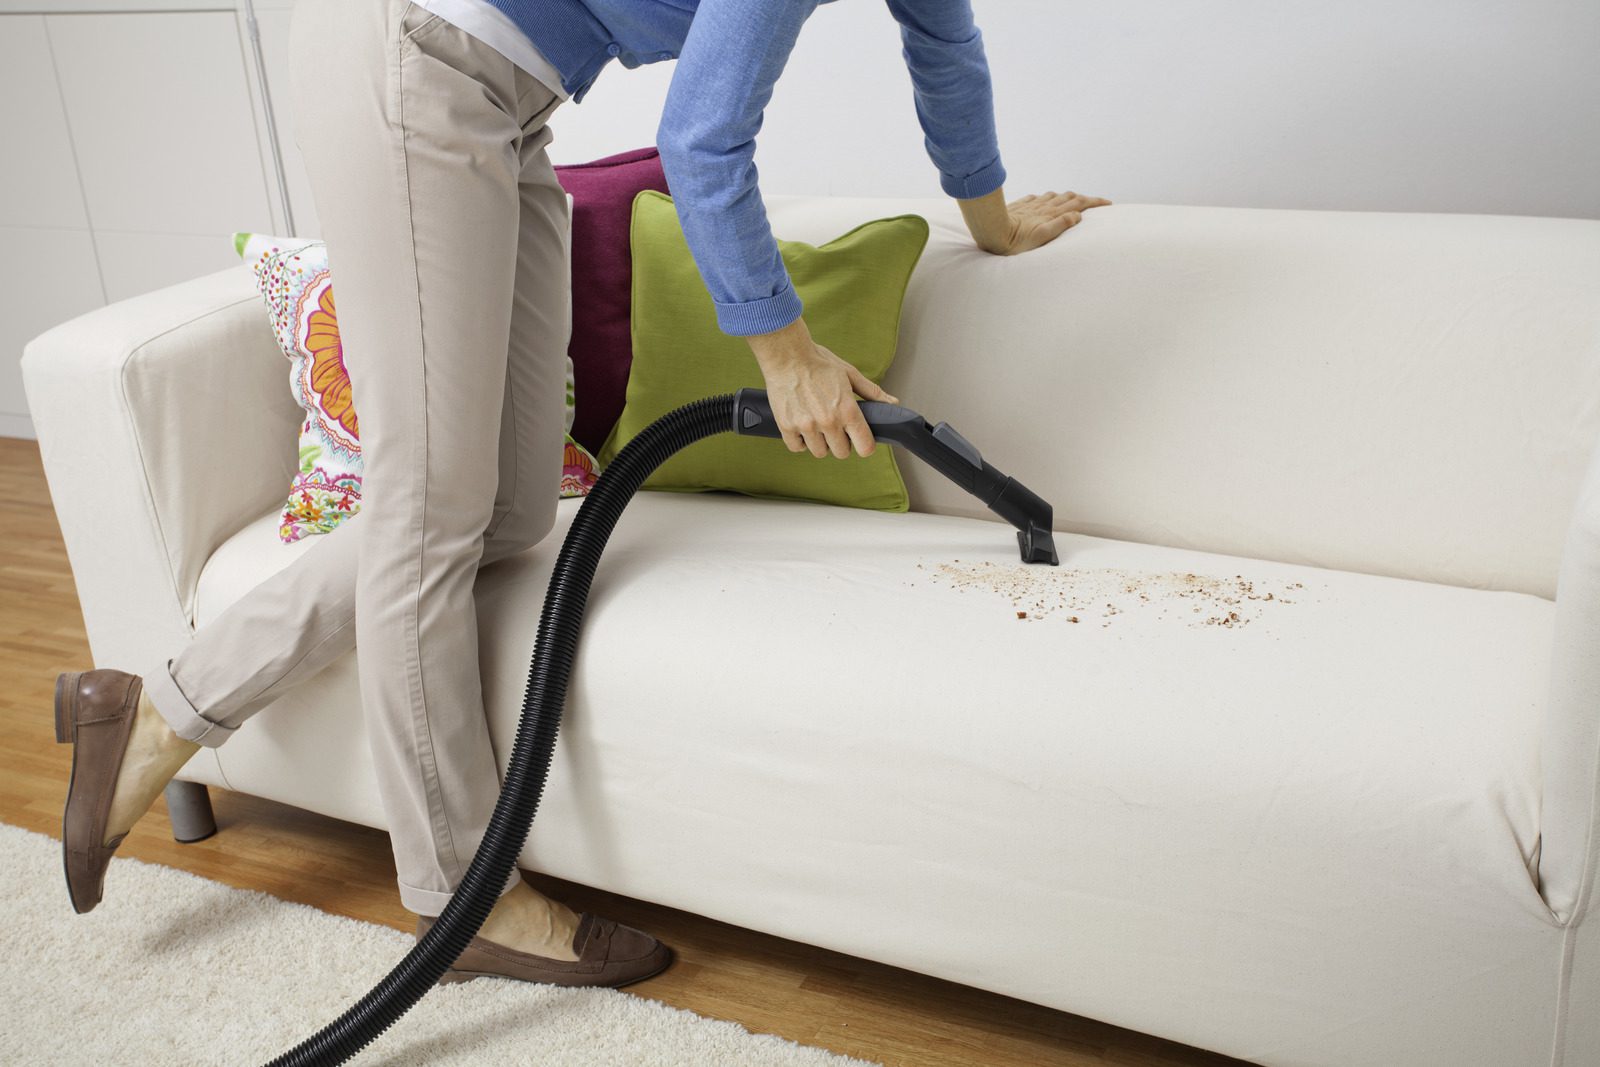 close shot of a person vacuum cleaning sofa.